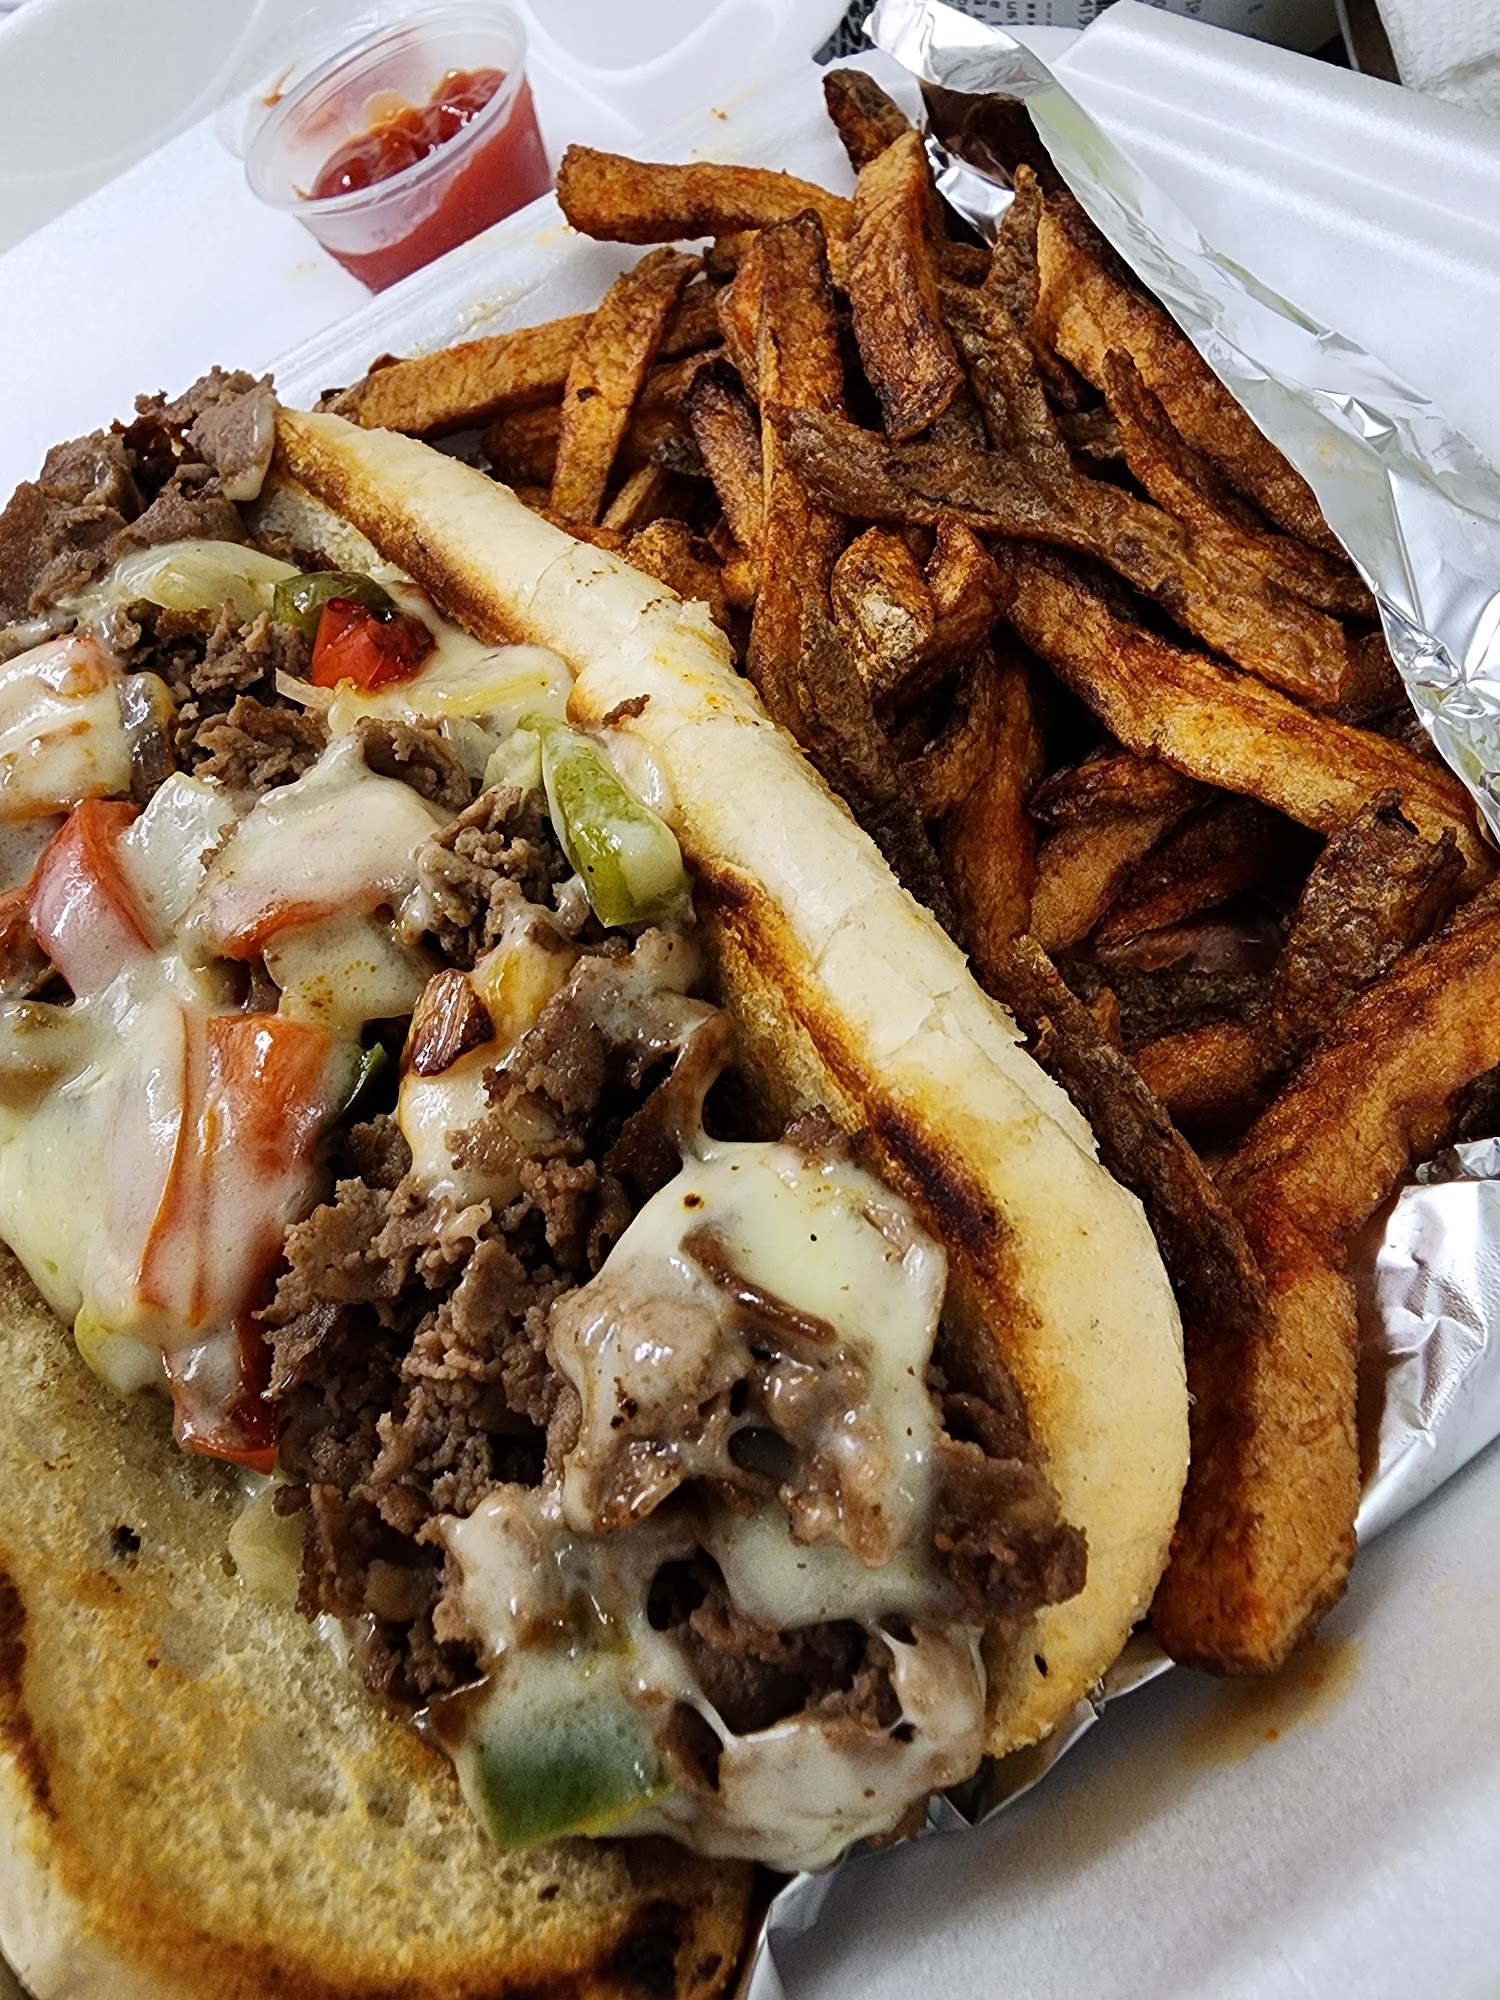 Mike's Gyros & More